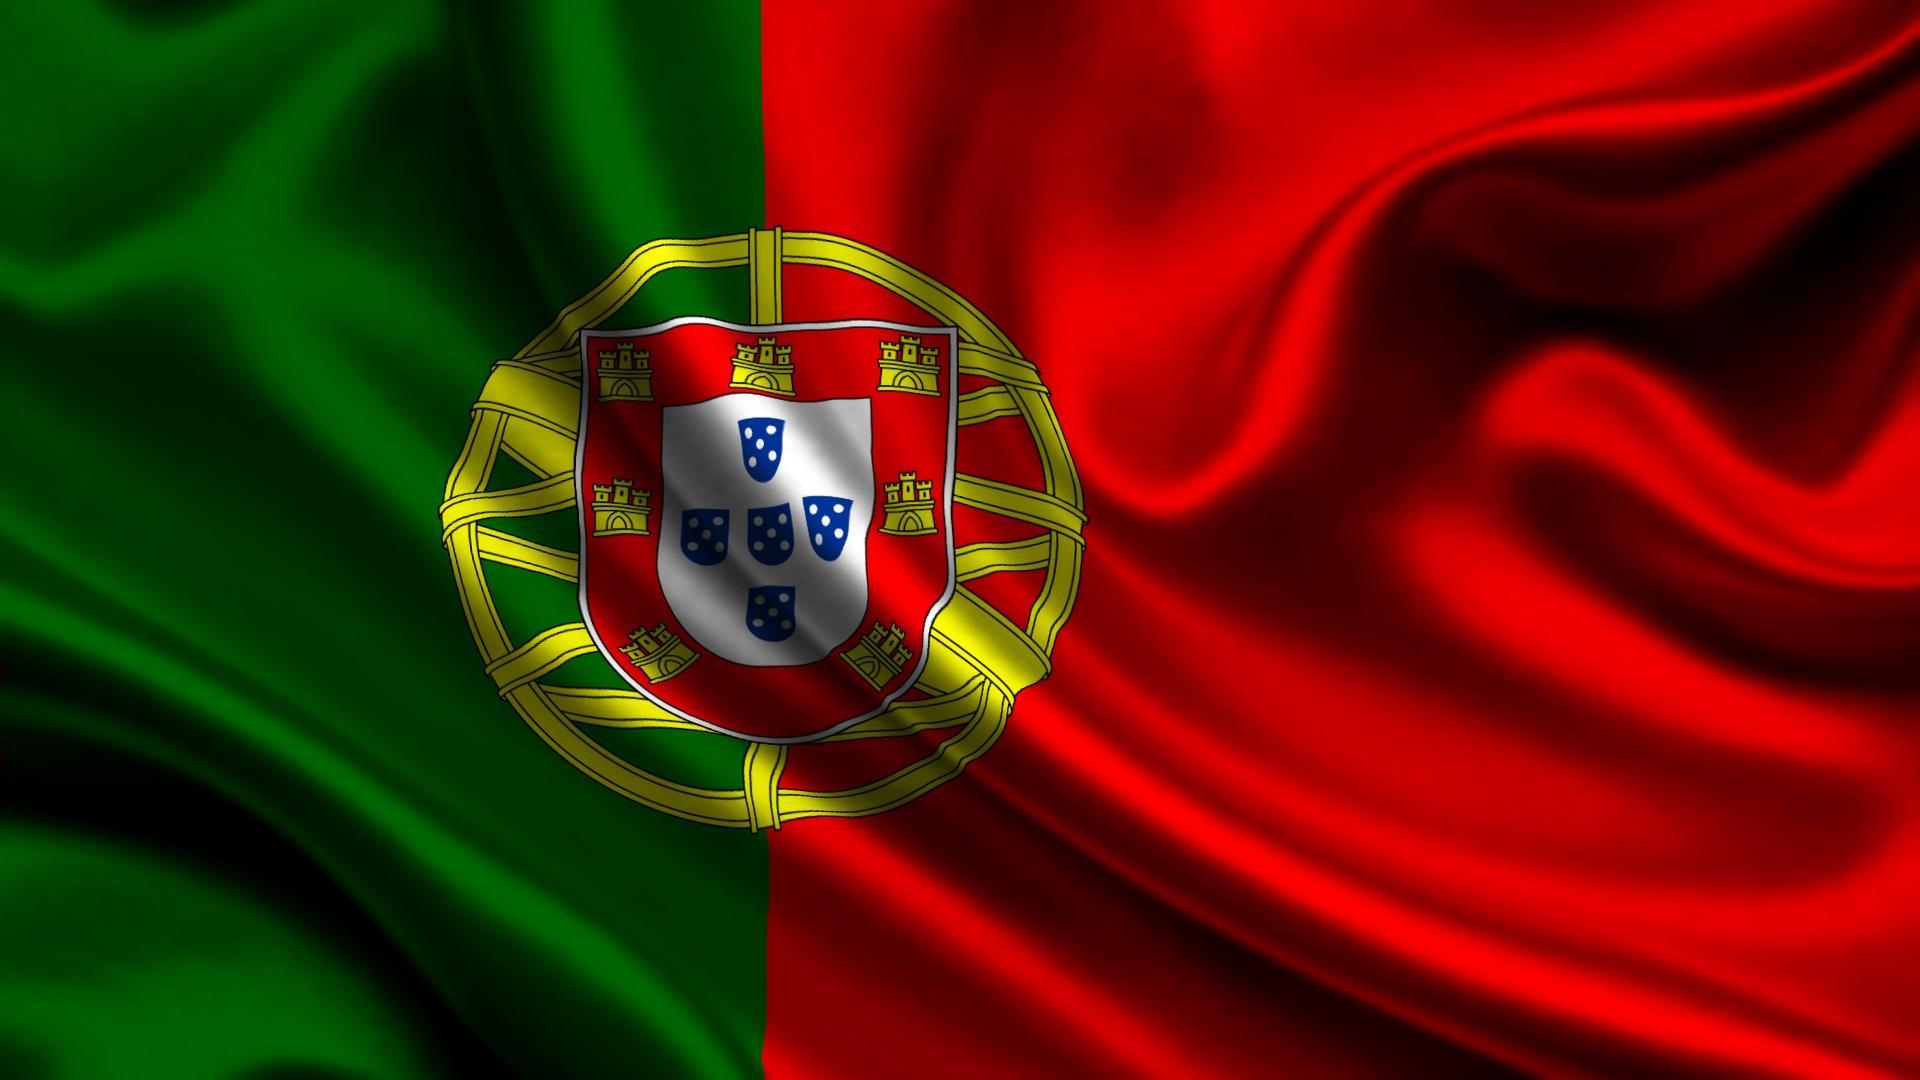 AudioSolutions available in Portugal